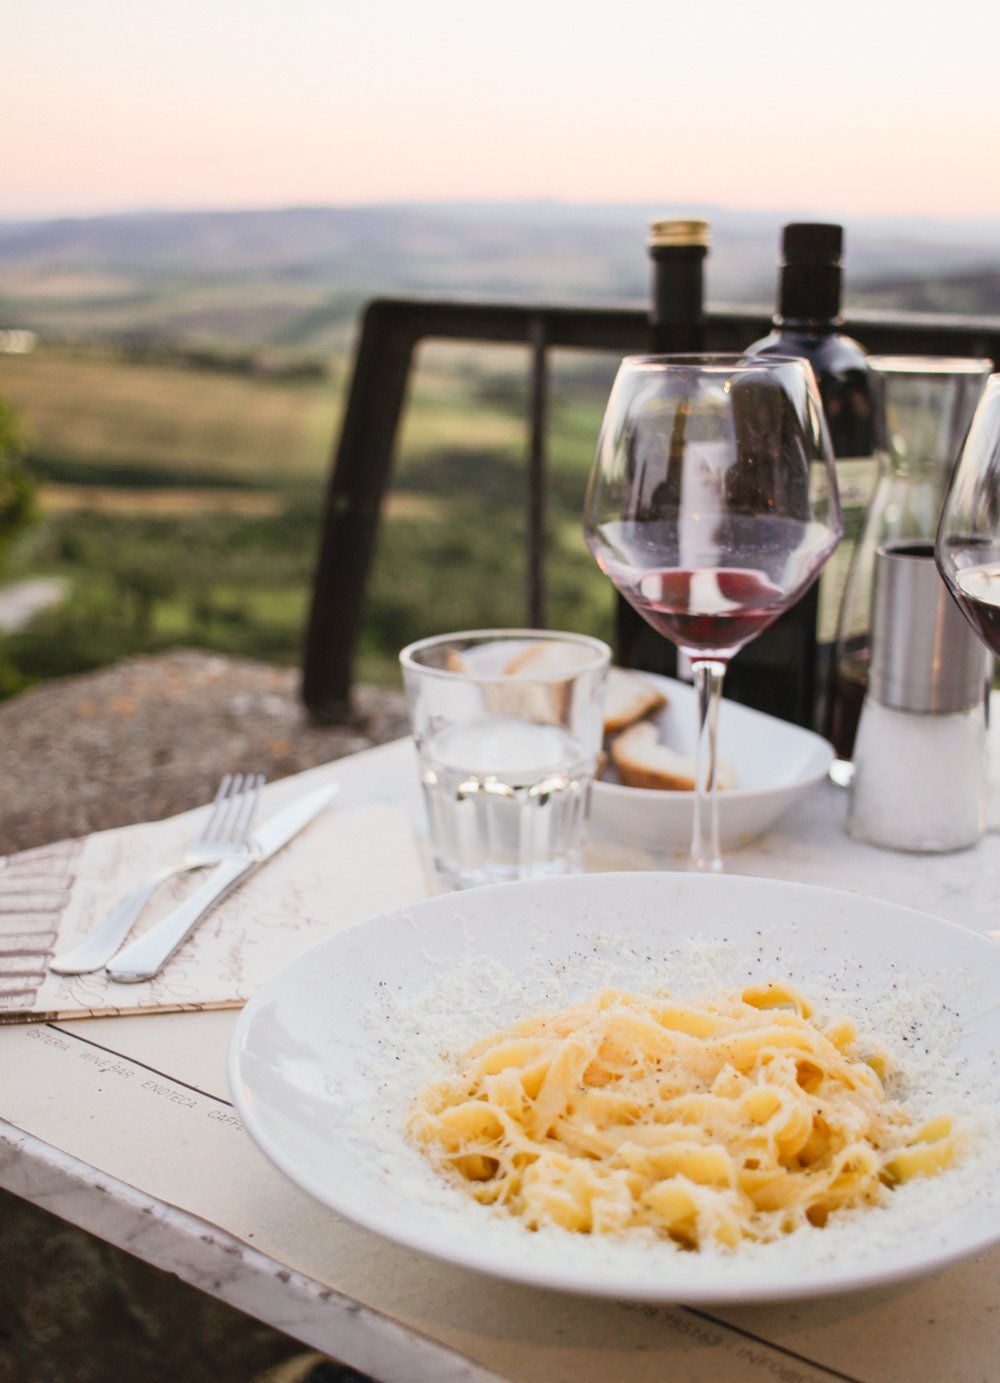 Pasta meal in Tuscany with a view | Monticchiello, Italy